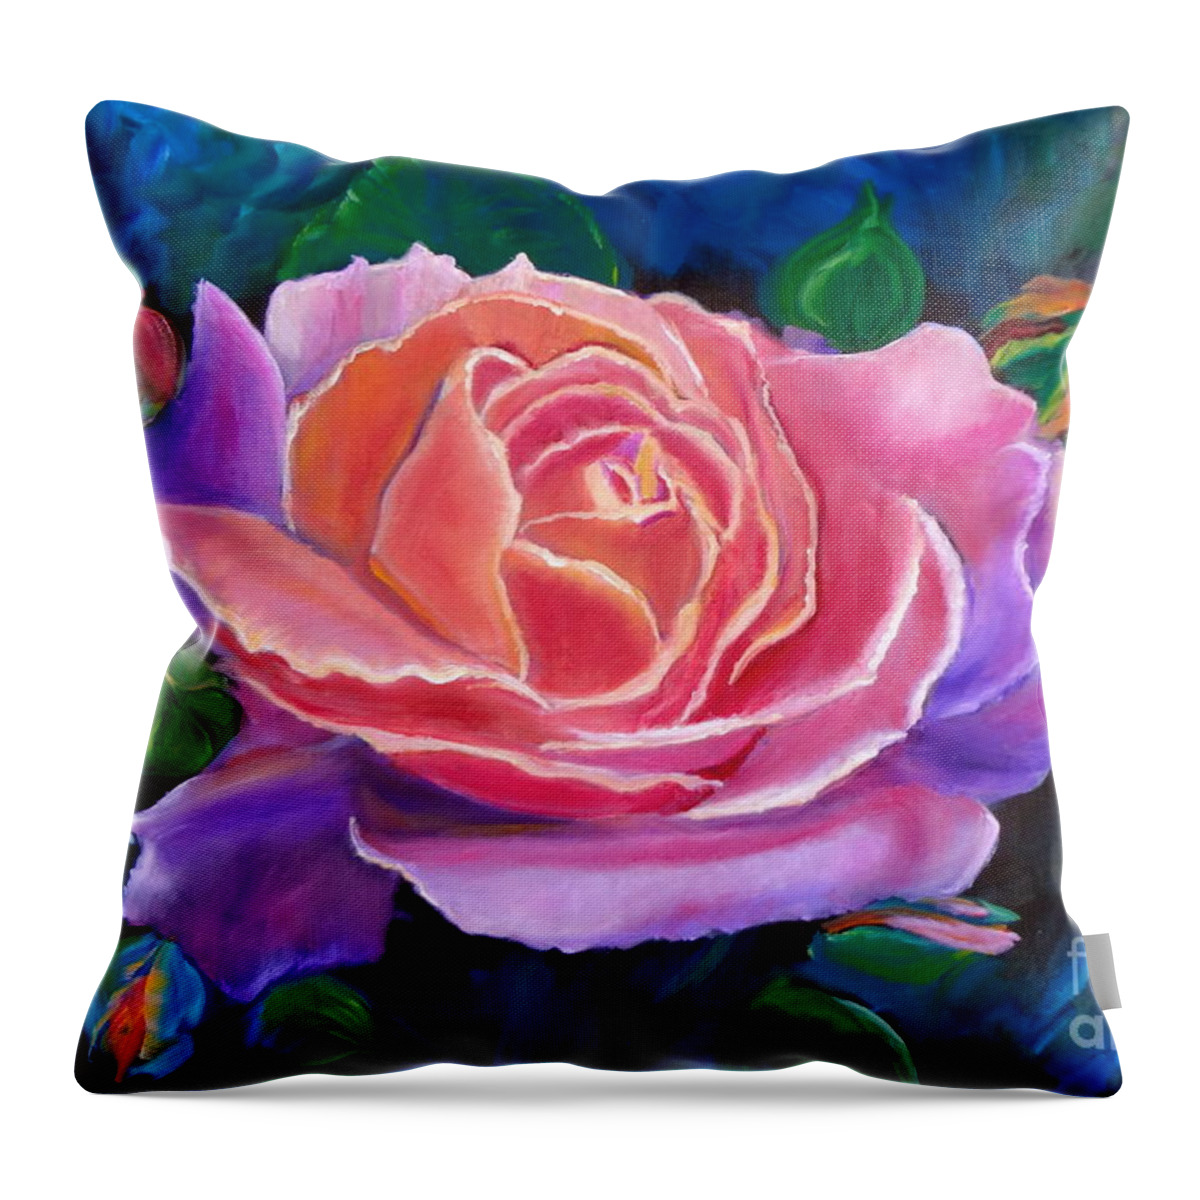 Rose Throw Pillow featuring the painting Gala Rose by Jenny Lee